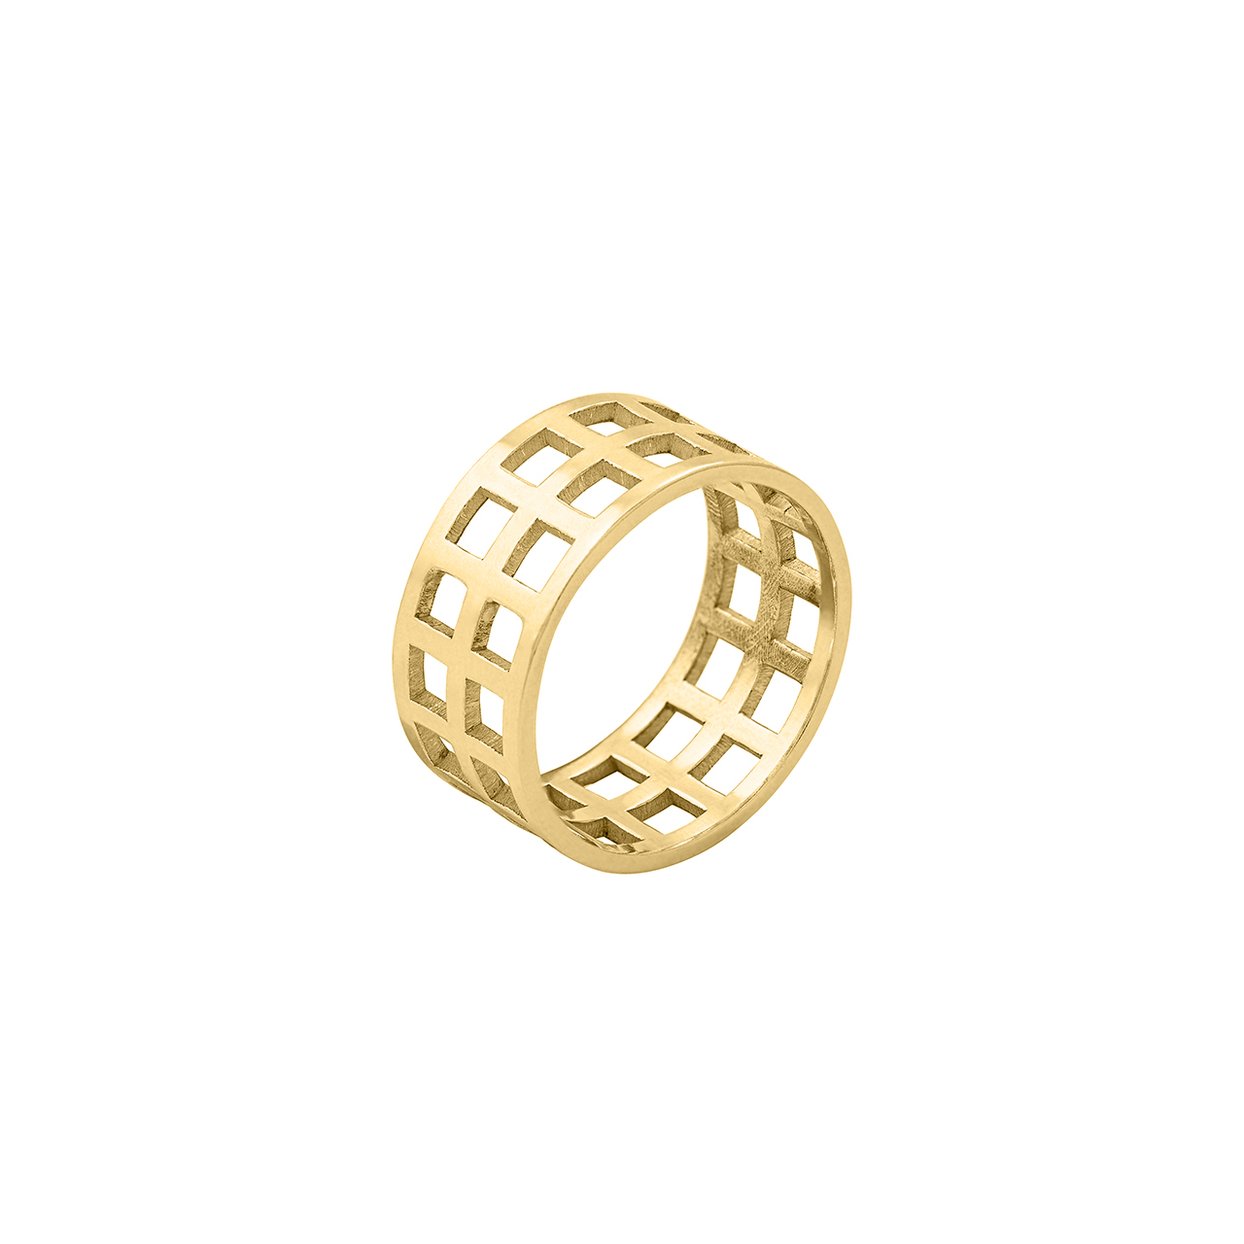 JR9 ring⎜Goldplated⎜54